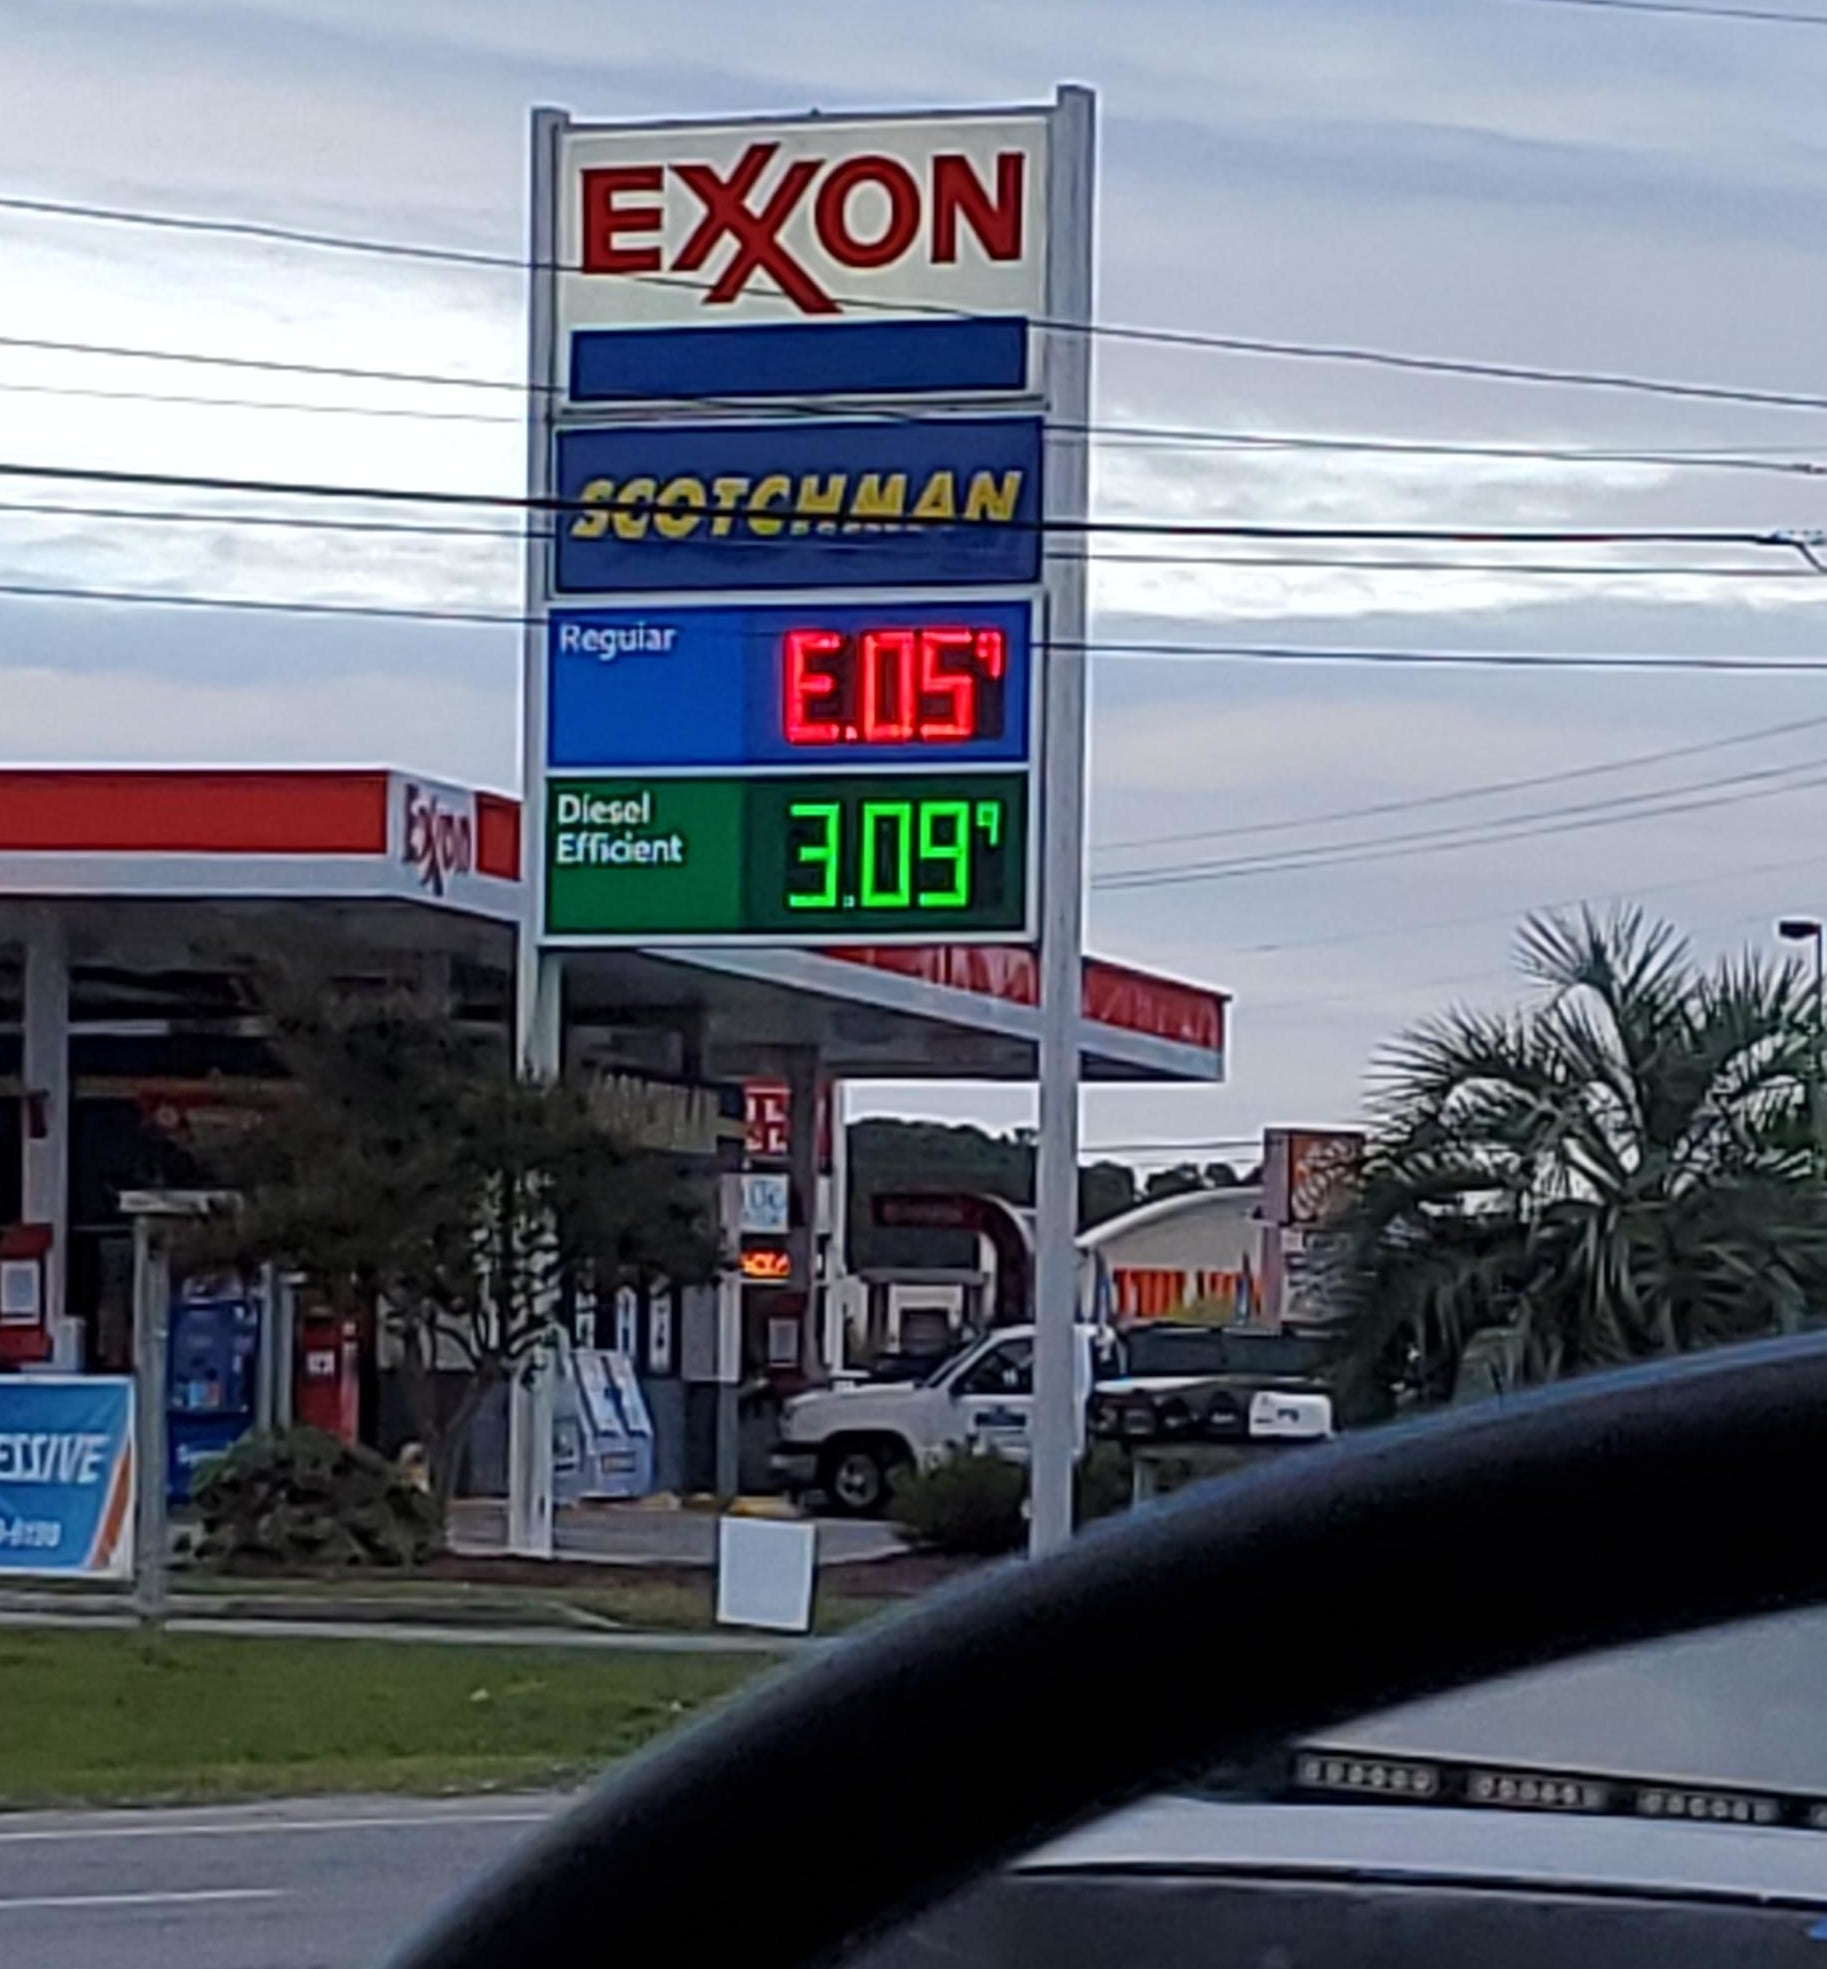 A gas station sign with the price backwards